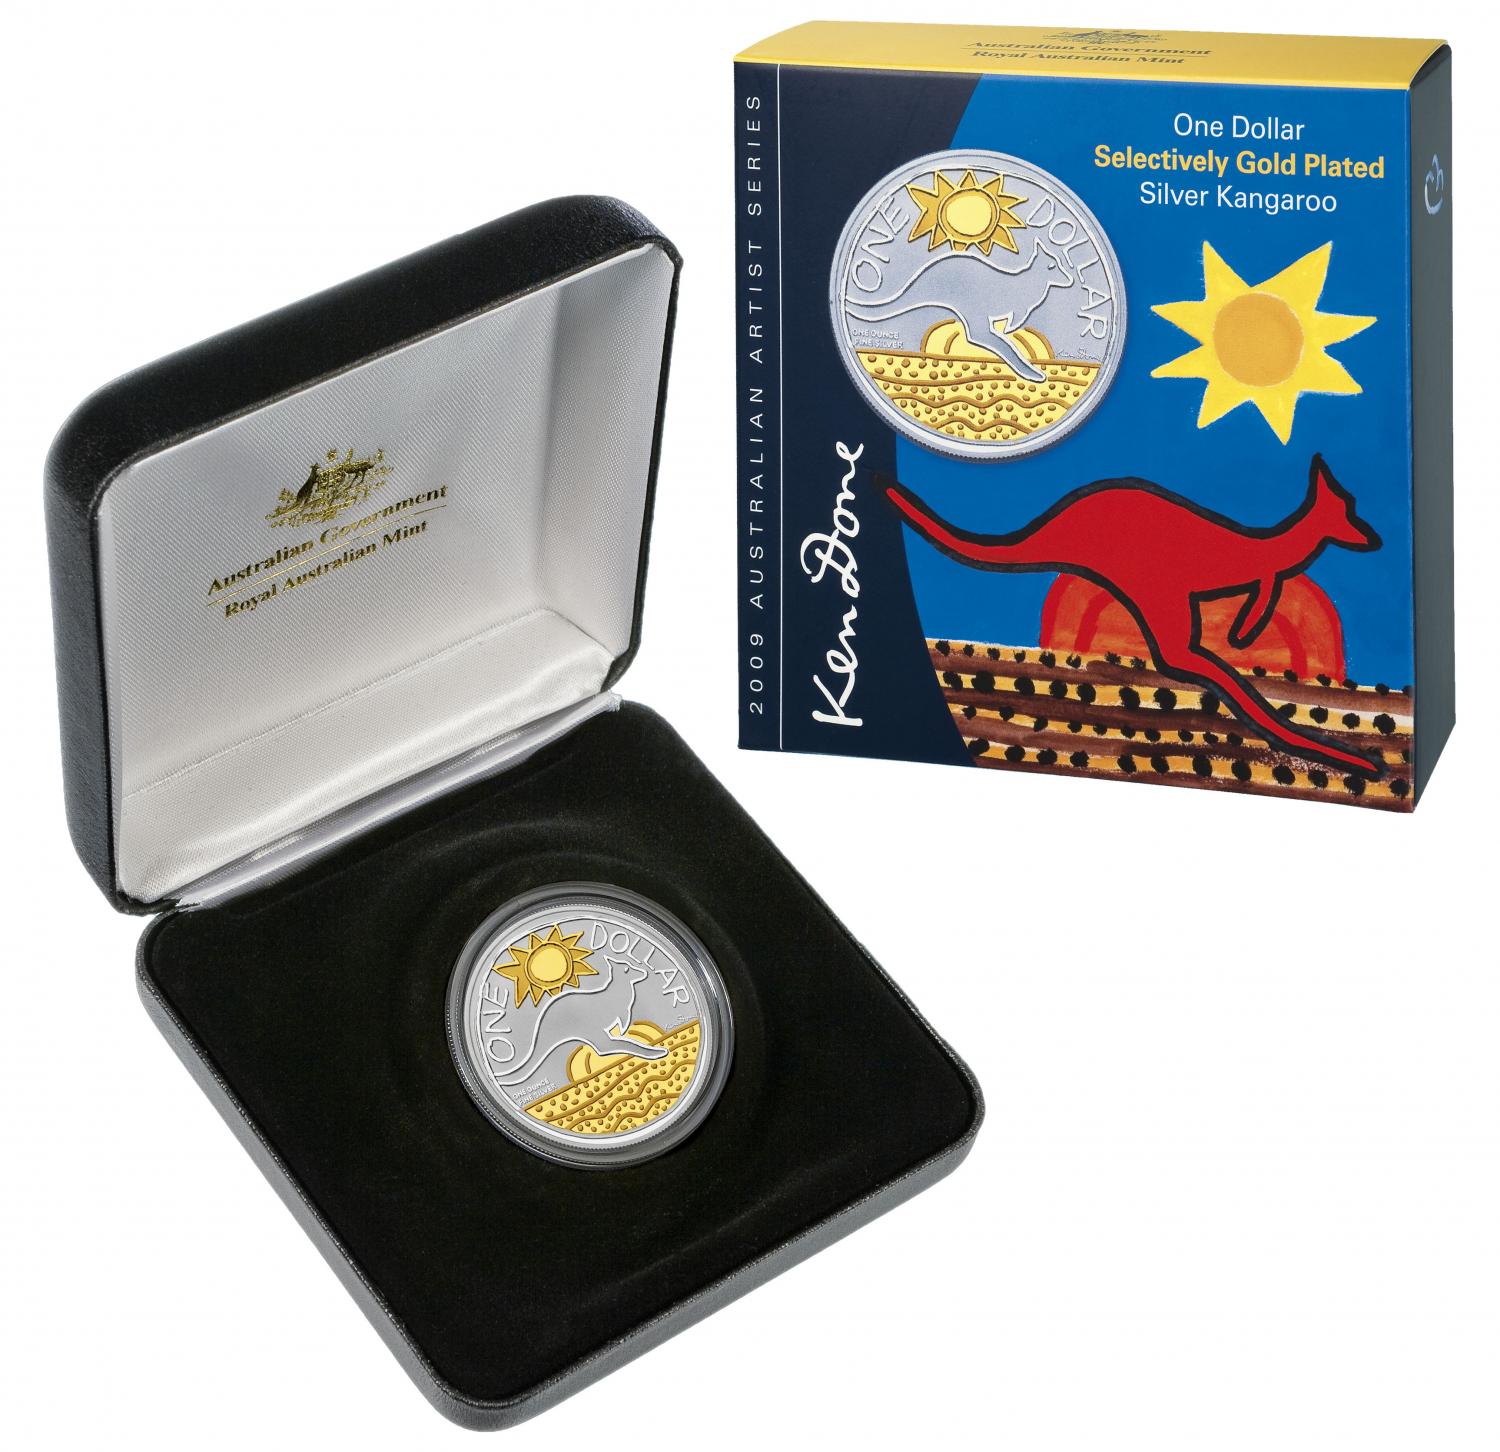 Thumbnail for 2009 Selectively Gold Plated 1oz Silver Proof Kangaroo Ken Done Design